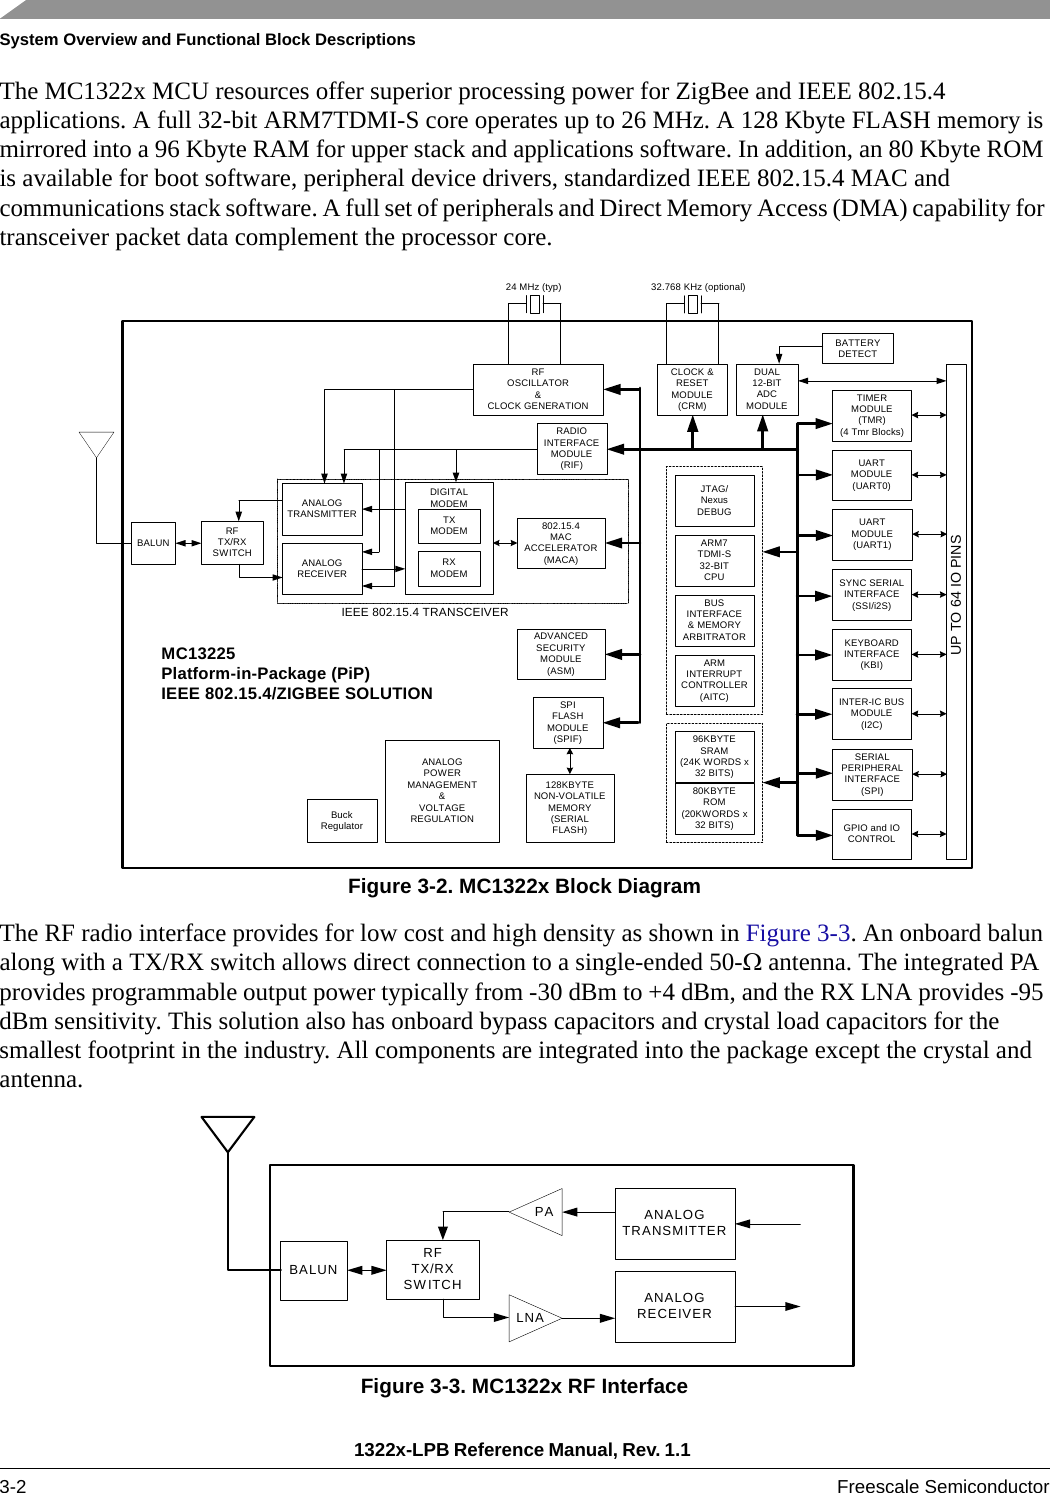 System Overview and Functional Block Descriptions1322x-LPB Reference Manual, Rev. 1.1 3-2 Freescale SemiconductorThe MC1322x MCU resources offer superior processing power for ZigBee and IEEE 802.15.4 applications. A full 32-bit ARM7TDMI-S core operates up to 26 MHz. A 128 Kbyte FLASH memory is mirrored into a 96 Kbyte RAM for upper stack and applications software. In addition, an 80 Kbyte ROM is available for boot software, peripheral device drivers, standardized IEEE 802.15.4 MAC and communications stack software. A full set of peripherals and Direct Memory Access (DMA) capability for transceiver packet data complement the processor core.Figure 3-2. MC1322x Block DiagramThe RF radio interface provides for low cost and high density as shown in Figure 3-3. An onboard balun along with a TX/RX switch allows direct connection to a single-ended 50-Ω antenna. The integrated PA provides programmable output power typically from -30 dBm to +4 dBm, and the RX LNA provides -95 dBm sensitivity. This solution also has onboard bypass capacitors and crystal load capacitors for the smallest footprint in the industry. All components are integrated into the package except the crystal and antenna.Figure 3-3. MC1322x RF InterfaceTIMERMODULE(TMR)(4 Tmr Blocks)UARTMODULE(UART0)UARTMODULE(UART1)SYNC SERIALINTERFACE(SSI/i2S)KEYBOARDINTERFACE(KBI)INTER-IC BUSMODULE(I2C)SERIALPERIPHERALINTERFACE(SPI)DUAL12-BITADCMODULEGPIO and IOCONTROLUP TO 64 IO PINSARM7TDMI-S32-BITCPUBUSINTERFACE&amp; MEMORYARBITRATORARMINTERRUPTCONTROLLER(AITC)JTAG/NexusDEBUGADVANCEDSECURITYMODULE(ASM)CLOCK &amp;RESETMODULE(CRM)RADIOINTERFACEMODULE(RIF)96KBYTESRAM(24K WORDS x32 BITS)80KBYTEROM(20KWORDS x32 BITS)RFOSCILLATOR&amp;CLOCK GENERATIONSPIFLASHMODULE(SPIF)802.15.4MACACCELERATOR(MACA)DIGITALMODEMTXMODEMRXMODEM128KBYTENON-VOLATILEMEMORY(SERIALFLASH)ANALOGTRANSMITTERANALOGRECEIVERRFTX/RXSWITCHIEEE 802.15.4 TRANSCEIVERBALUNANALOGPOWERMANAGEMENT&amp;VOLTAGEREGULATIONMC13225Platform-in-Package (PiP)IEEE 802.15.4/ZIGBEE SOLUTIONBuckRegulator24 MHz (typ) 32.768 KHz (optional)BATTERYDETECTANALOGTRANSMITTERANALOGRECEIVERRFTX/RXSWITCHBALUNLNAPA